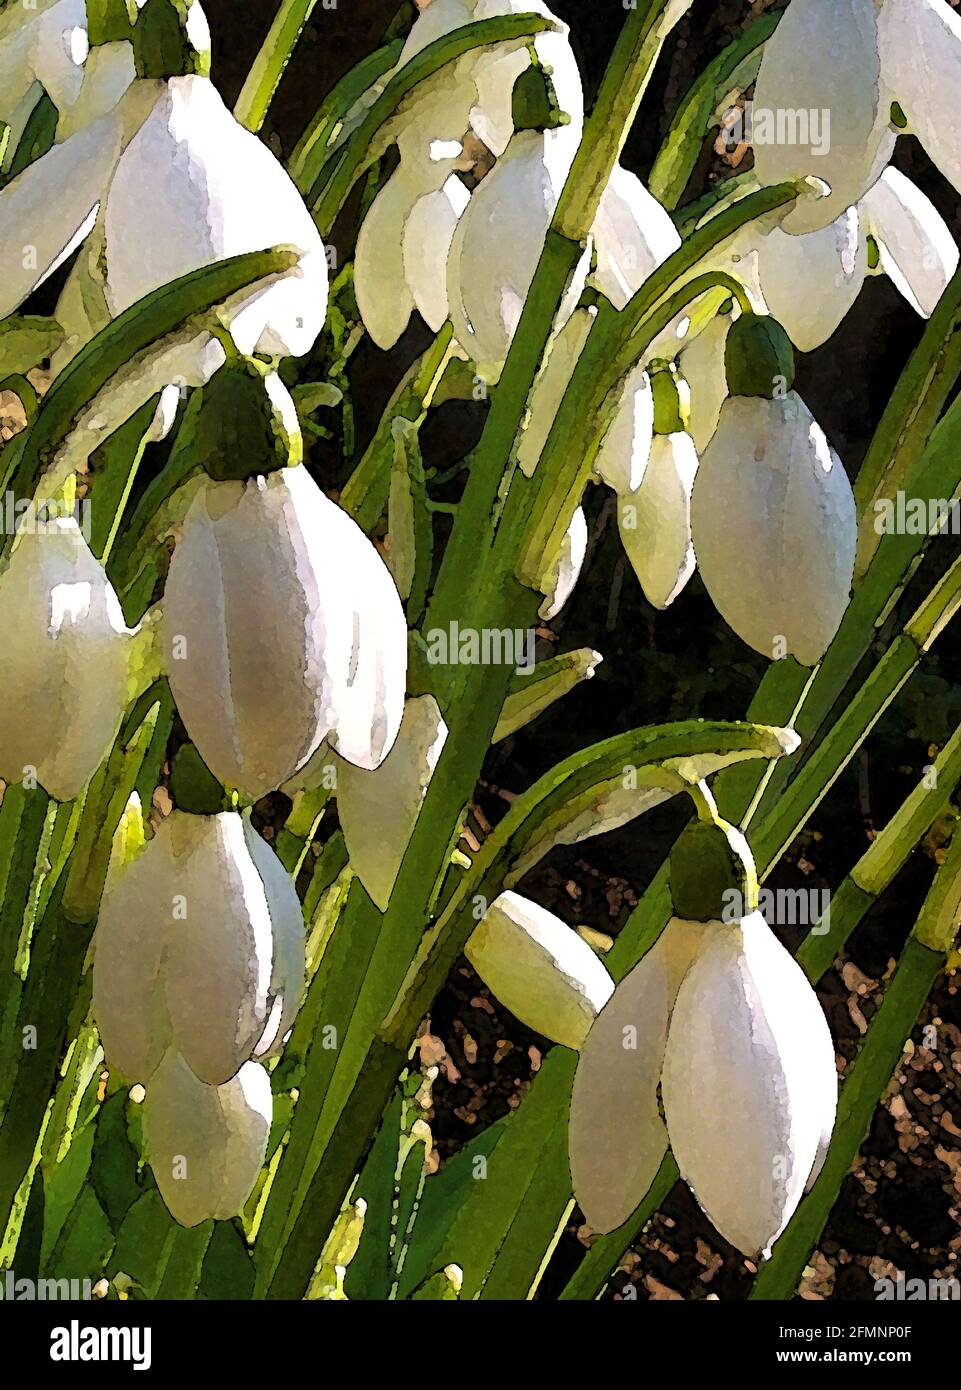 Snowdrops (Galanthus nivalis) One of Forty-two Iconic Images of English Garden Flowers, Wildflowers and Rural Landscapes. Stock Photo